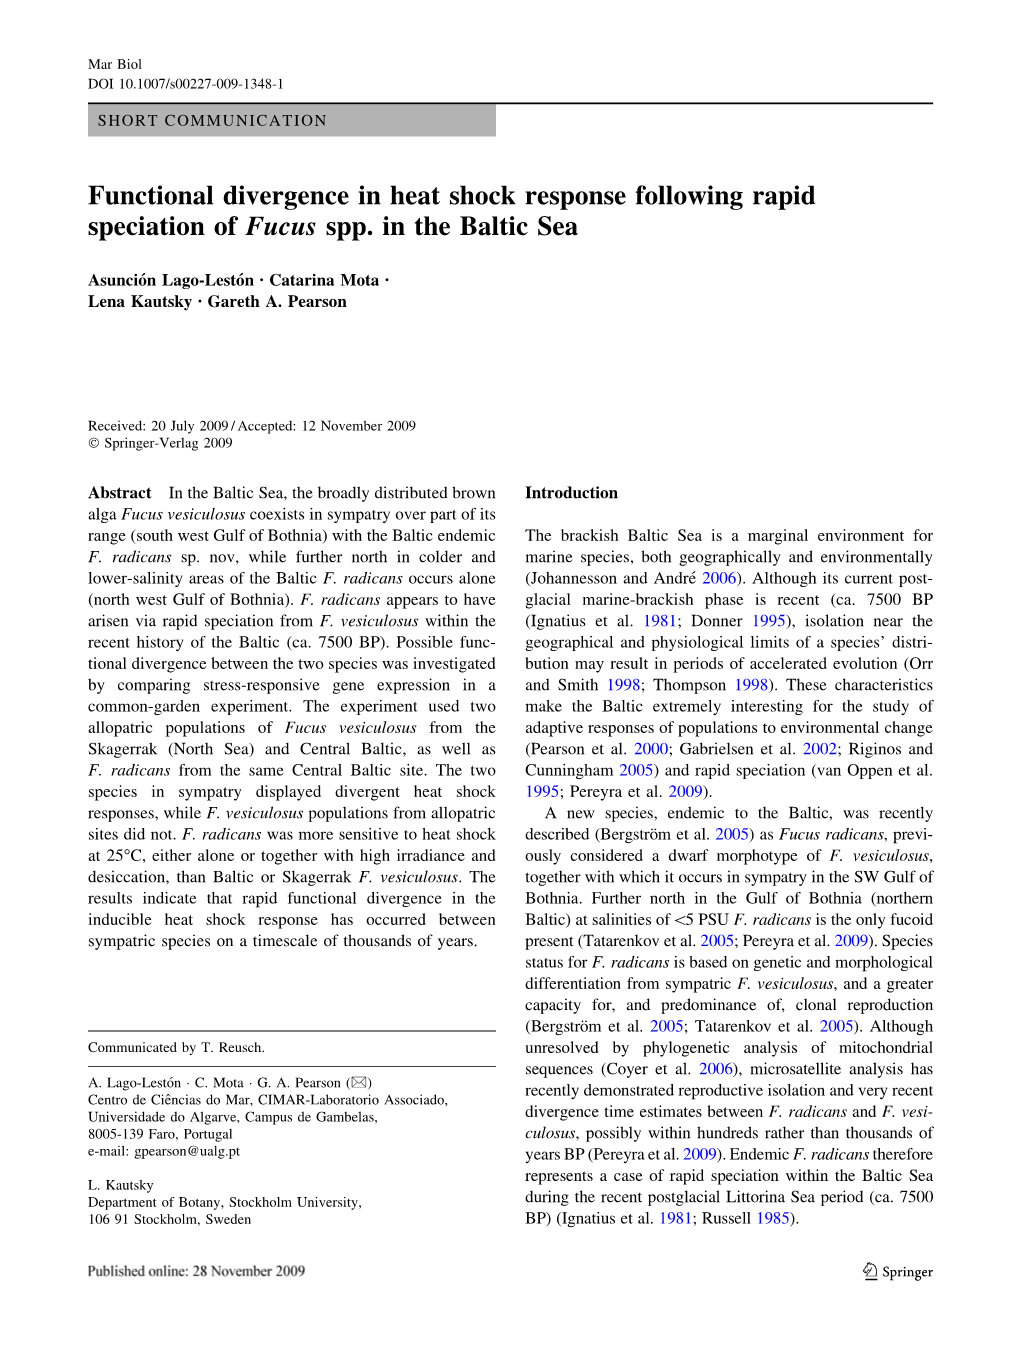 Functional Divergence in Heat Shock Response Following Rapid Speciation of Fucus Spp